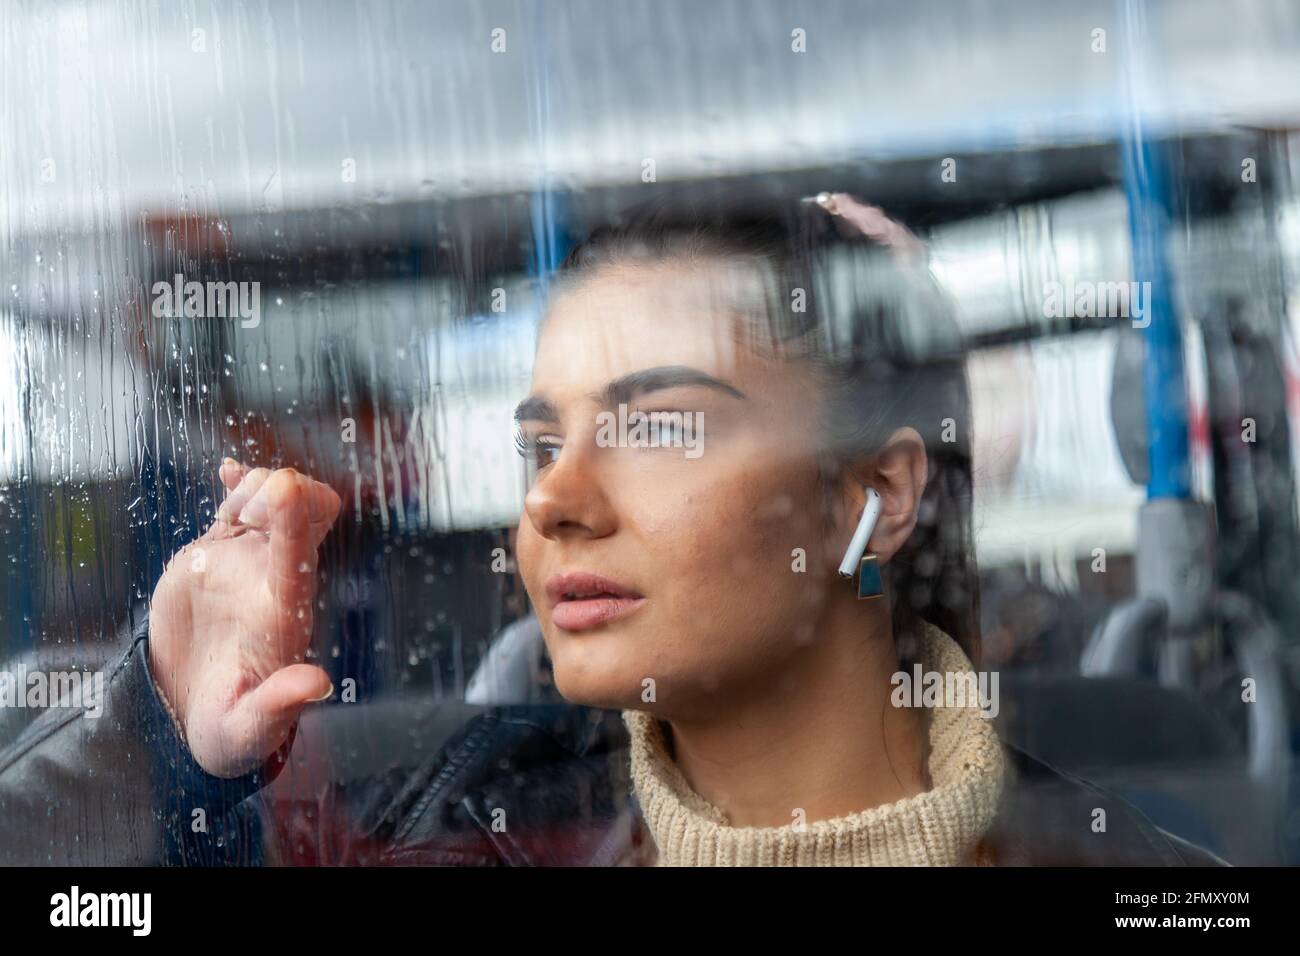 Girl staring out of rainy window on a bus Stock Photo